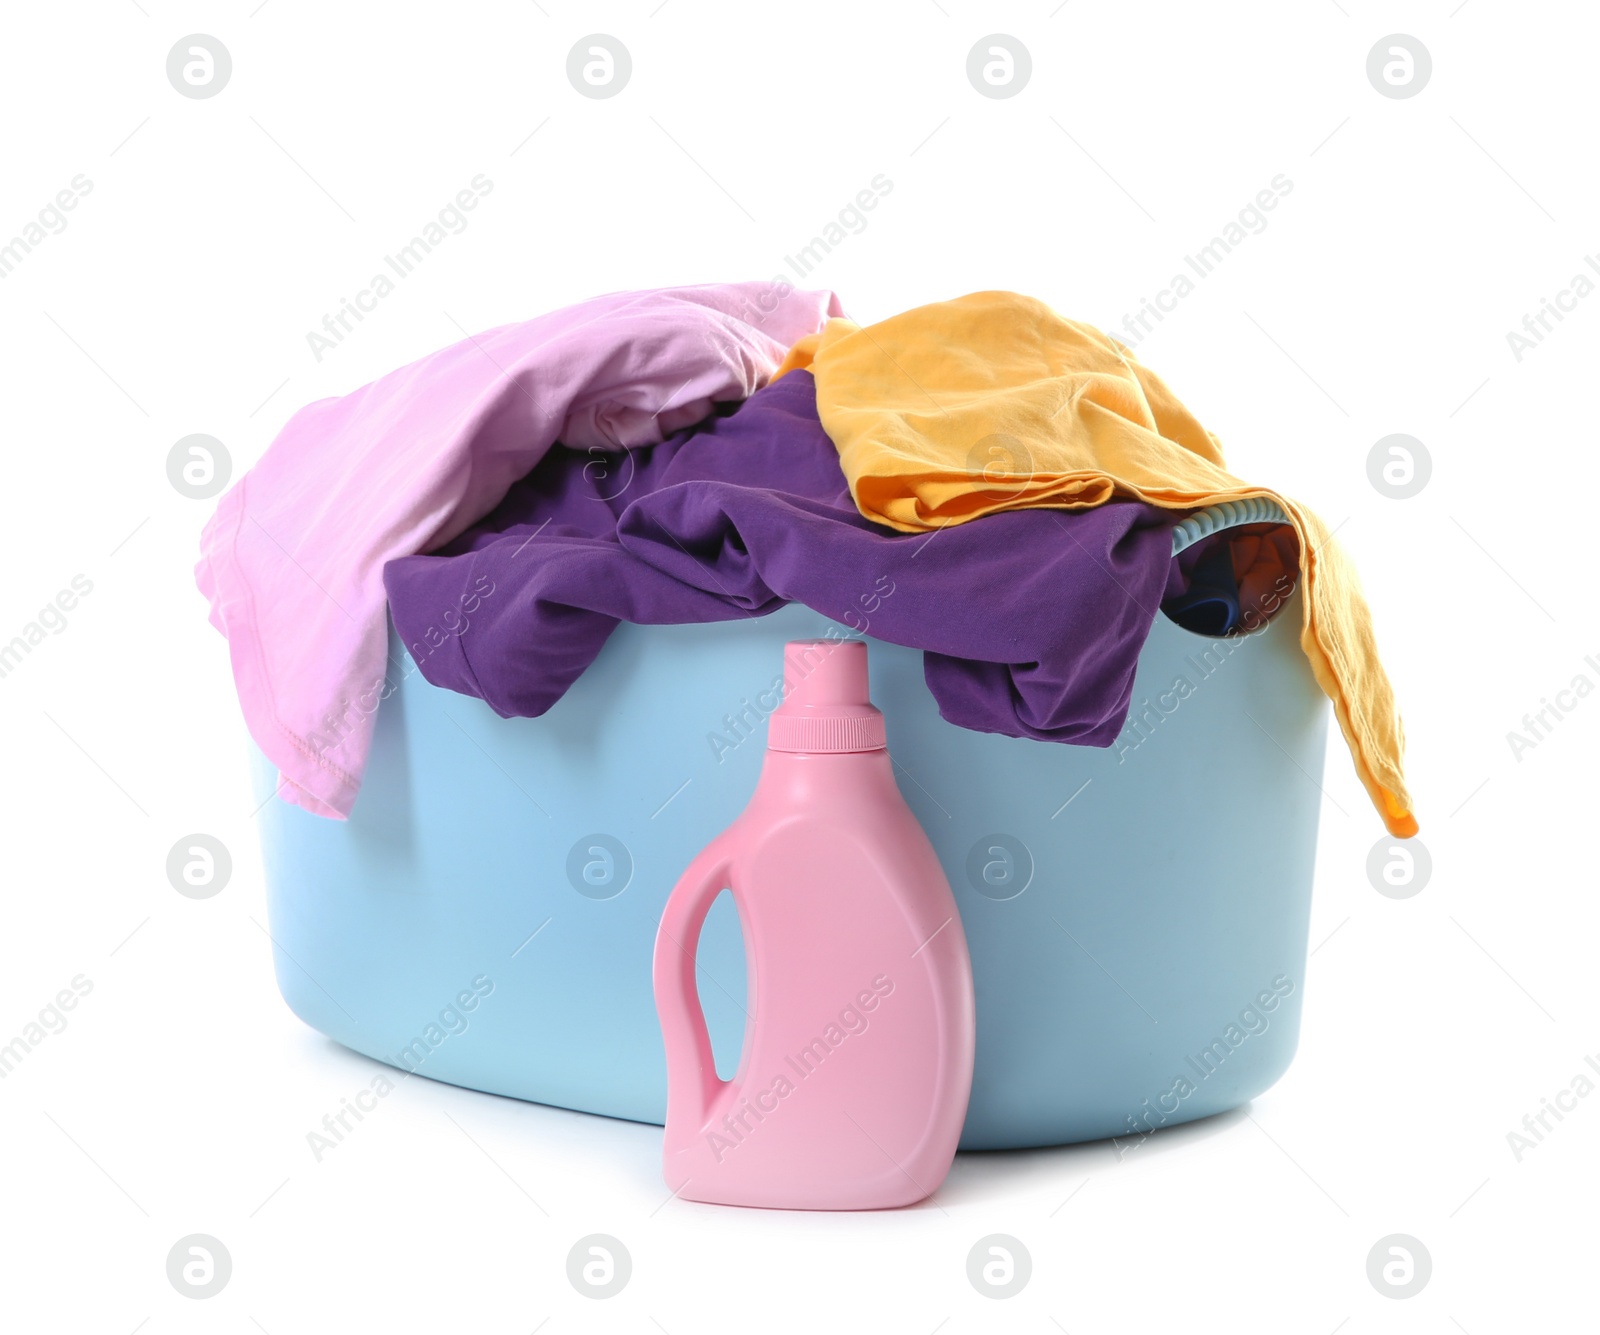 Photo of Laundry basket with dirty clothes and detergent isolated on white